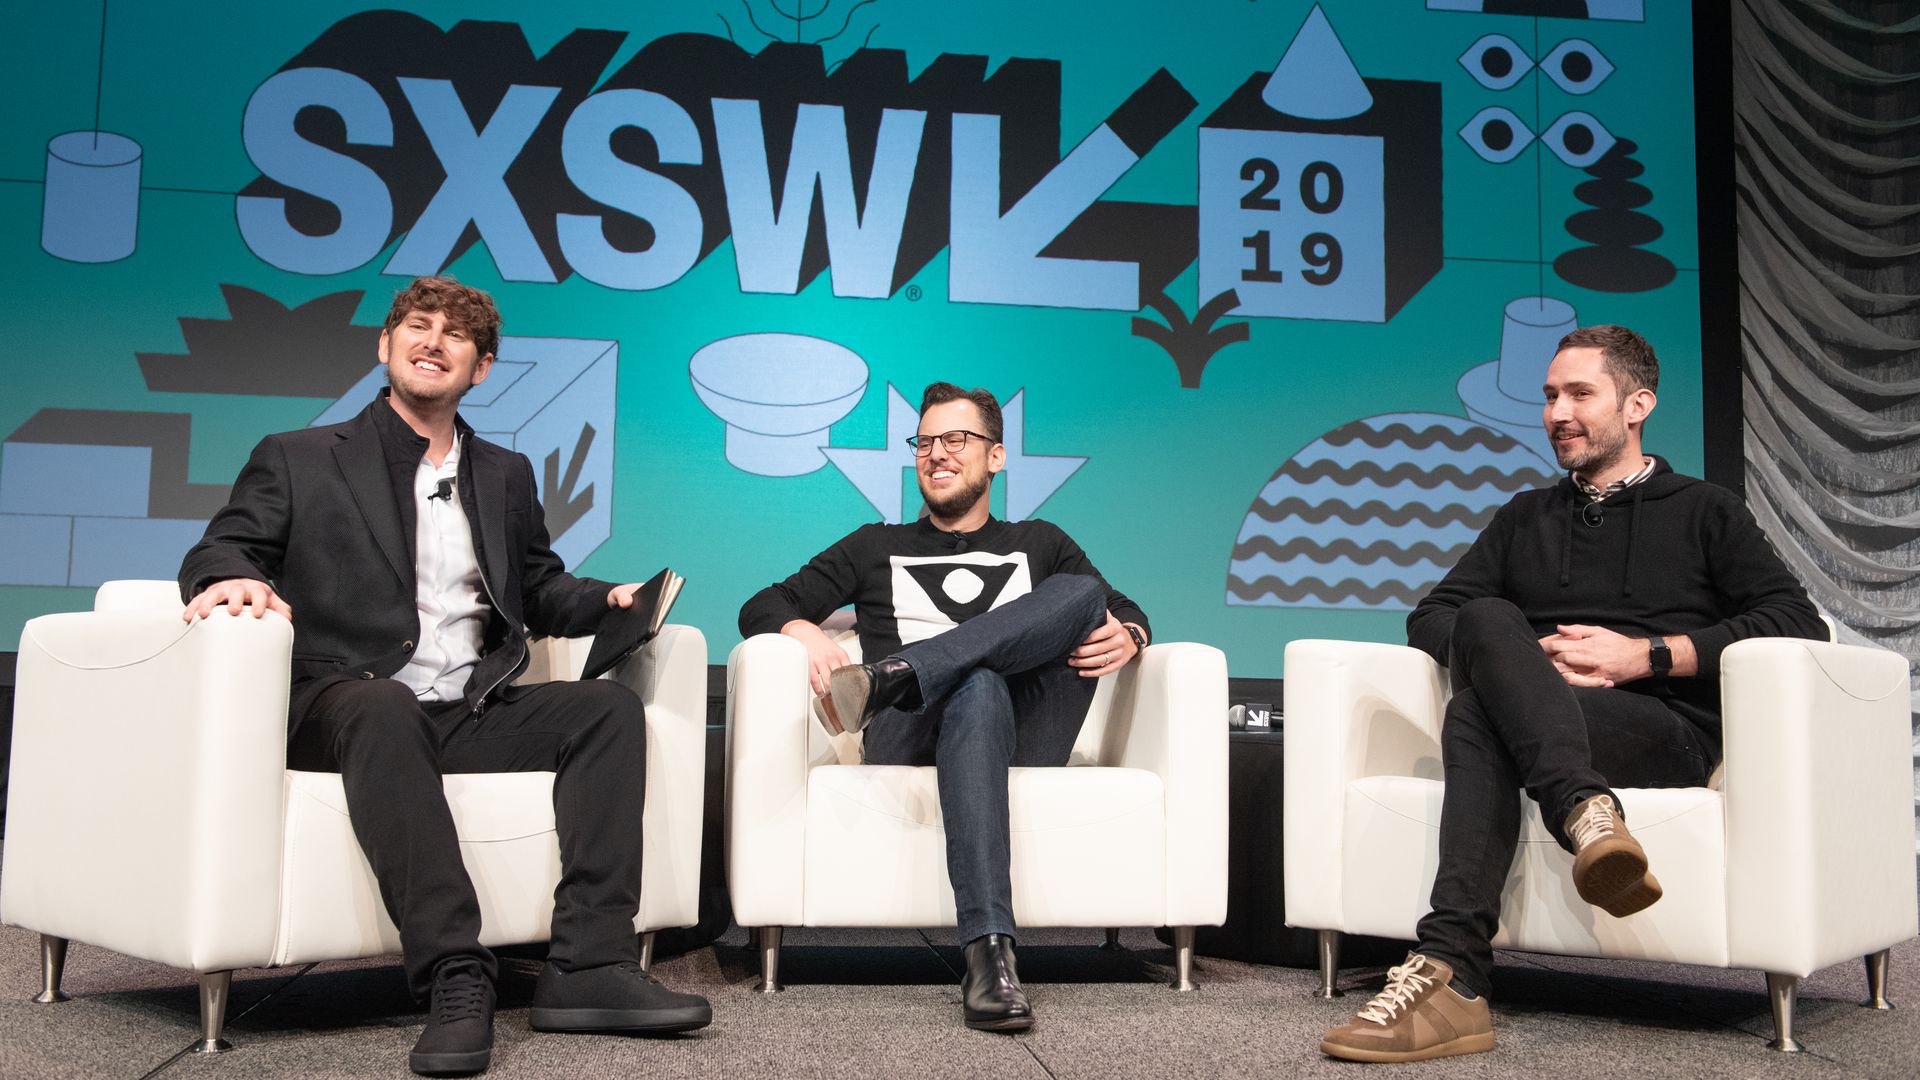 South by Southwest continues another year of entertainment, brand